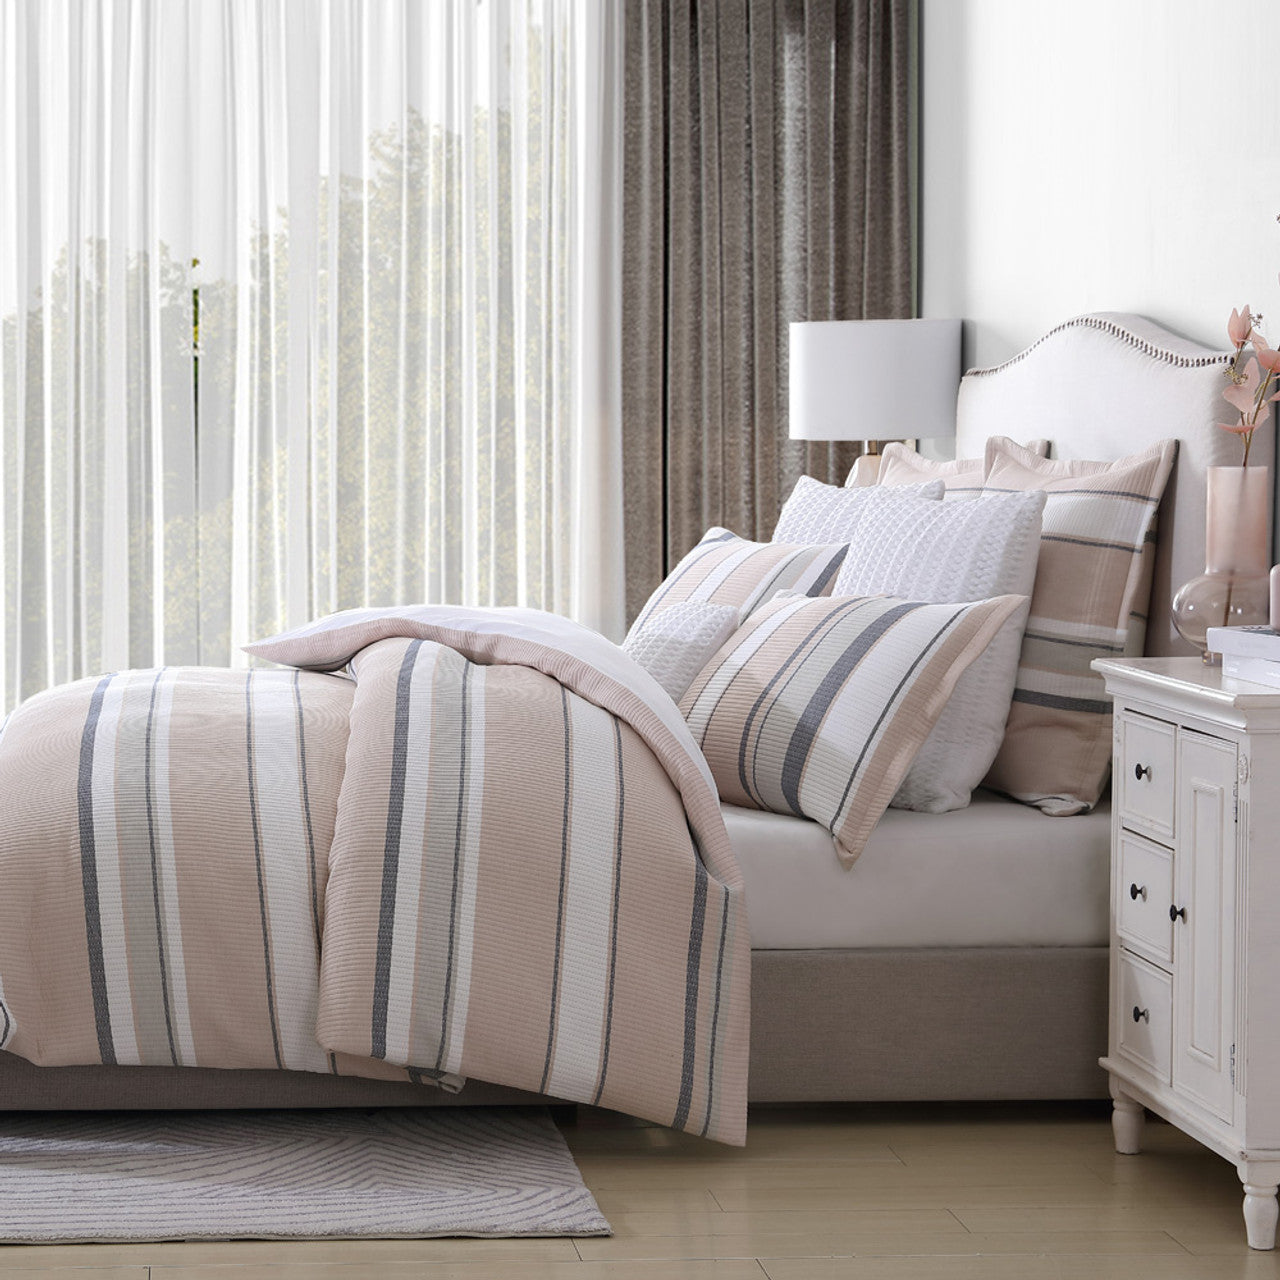 Experience a touch of laid-back sophistication with the Private Collection killarney dune bed quilt cover set. This exquisite set boasts relaxed stripes, perfect for capturing the essence of a stylish summer. The variegated stripes in serene shades of chambray, dune, and avocado effortlessly blend together on the luxuriously soft matelassé fabric. 